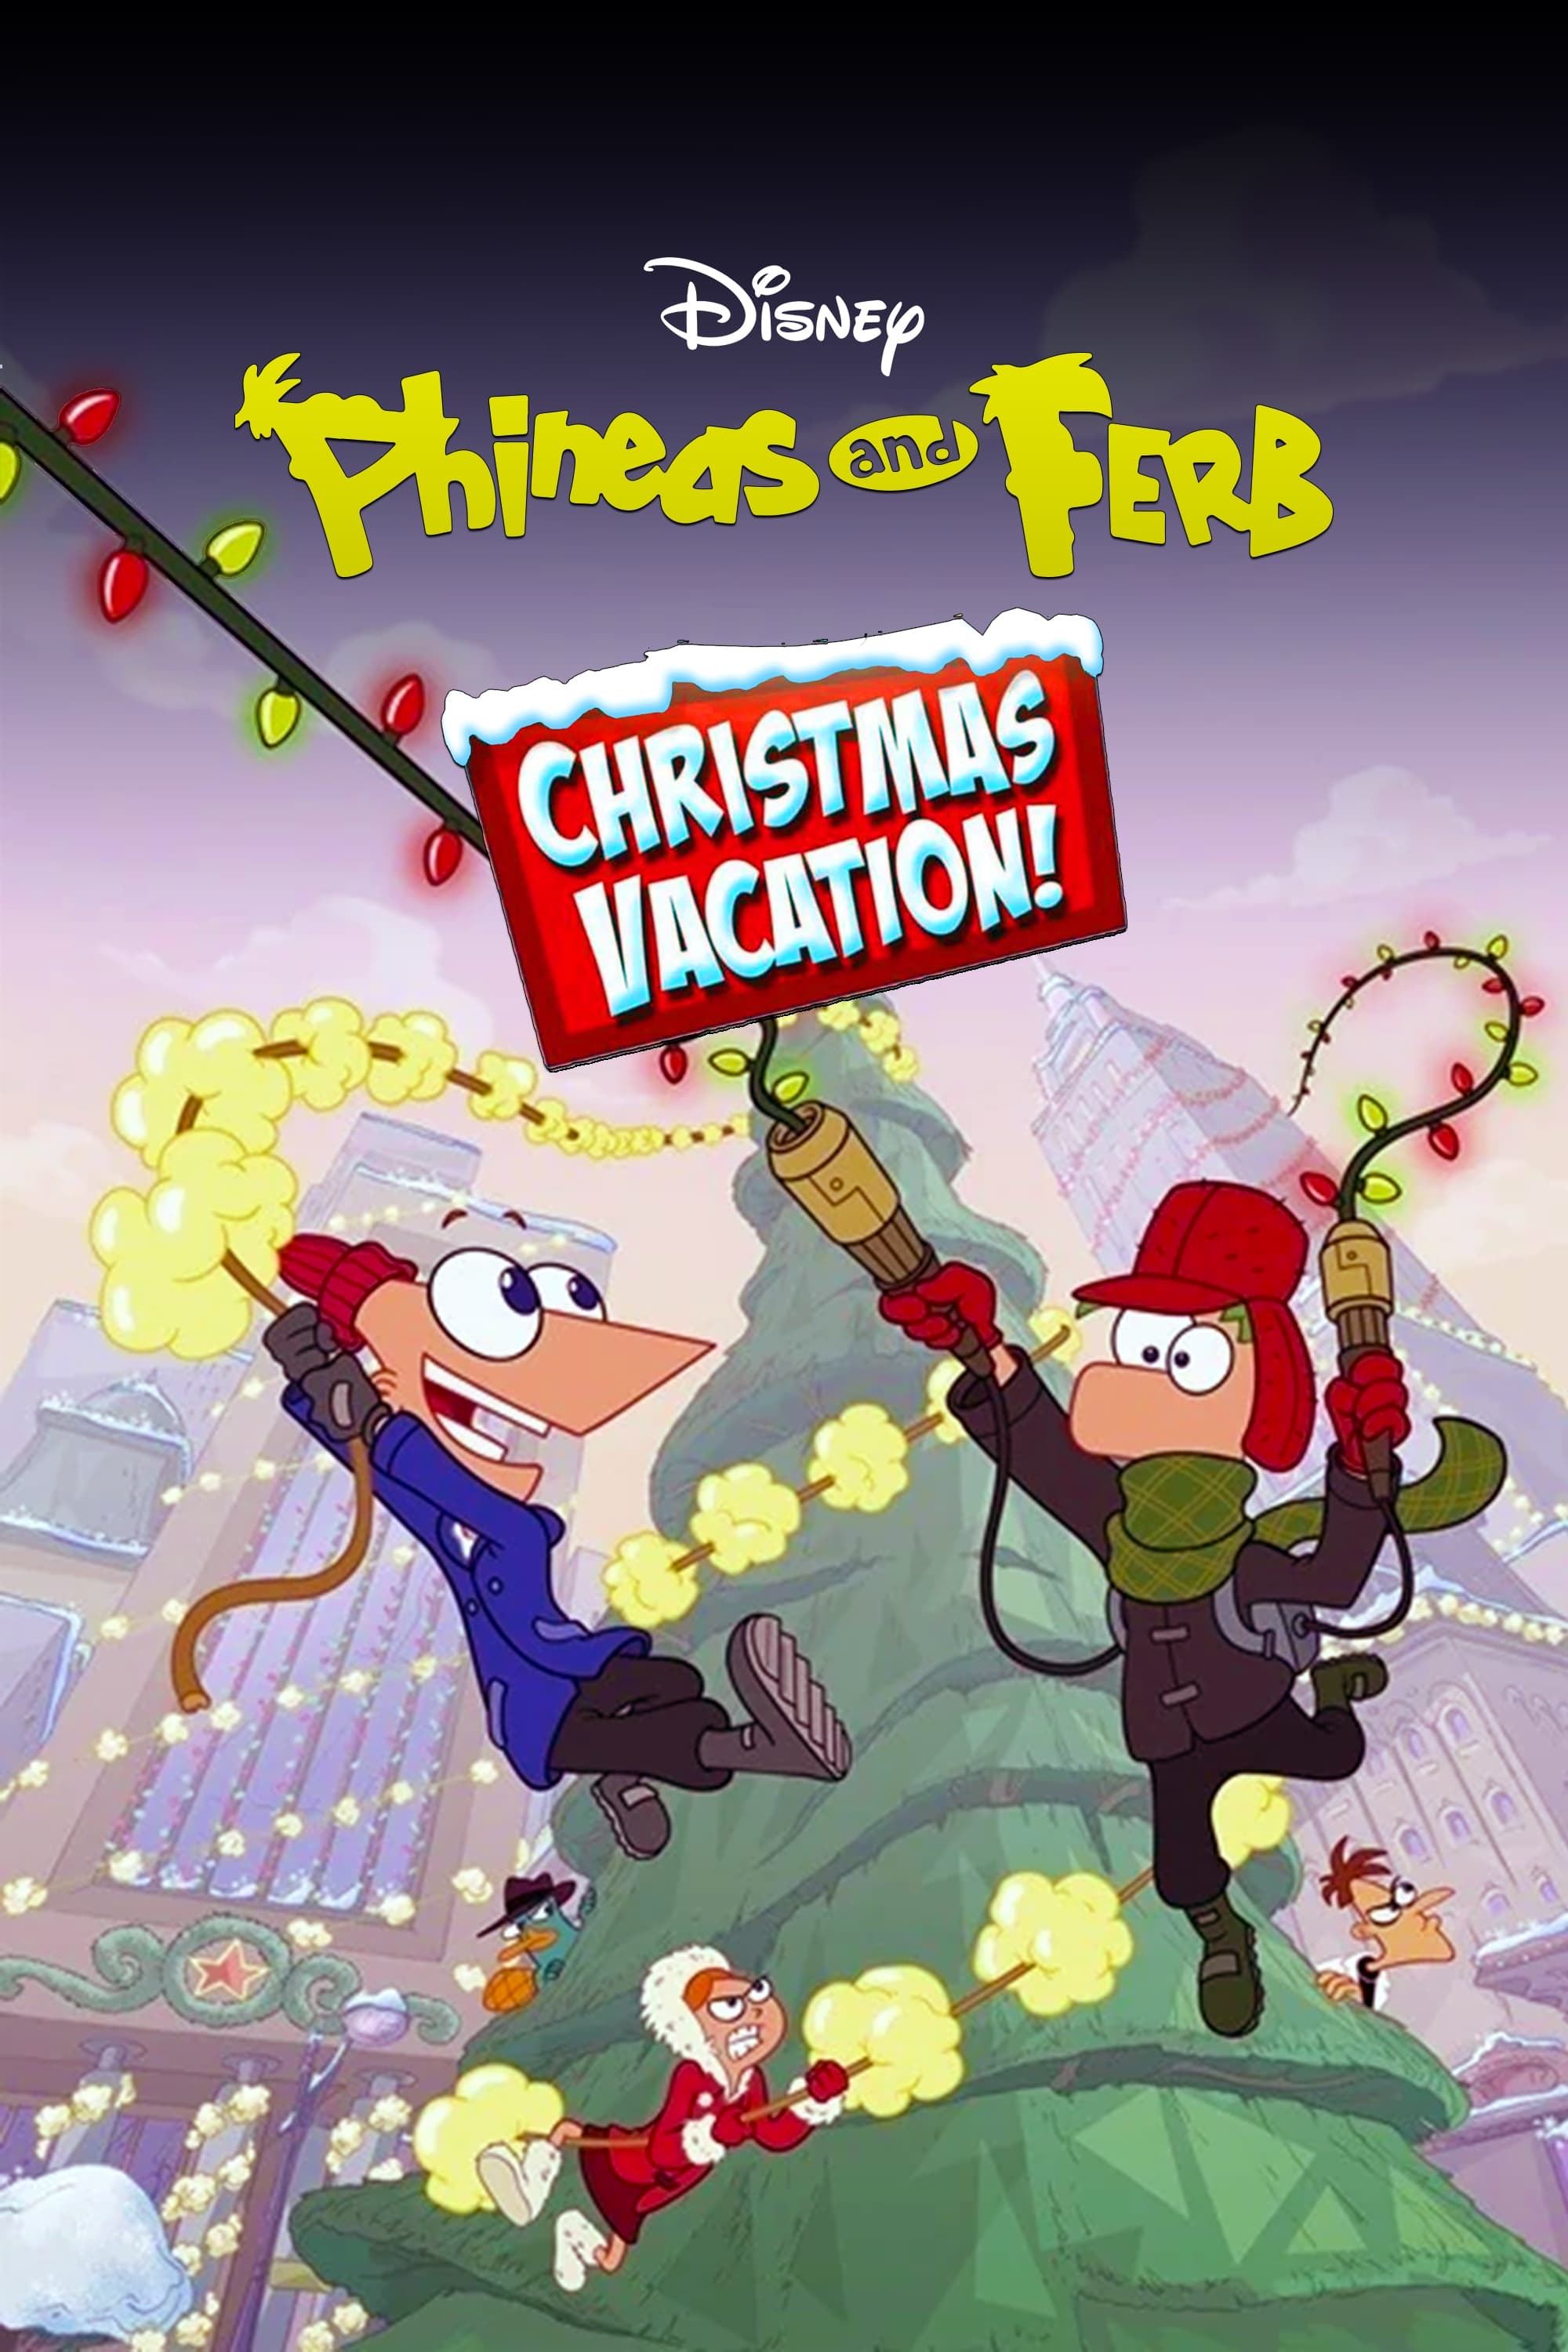 Phineas and Ferb Christmas Vacation! (2009)